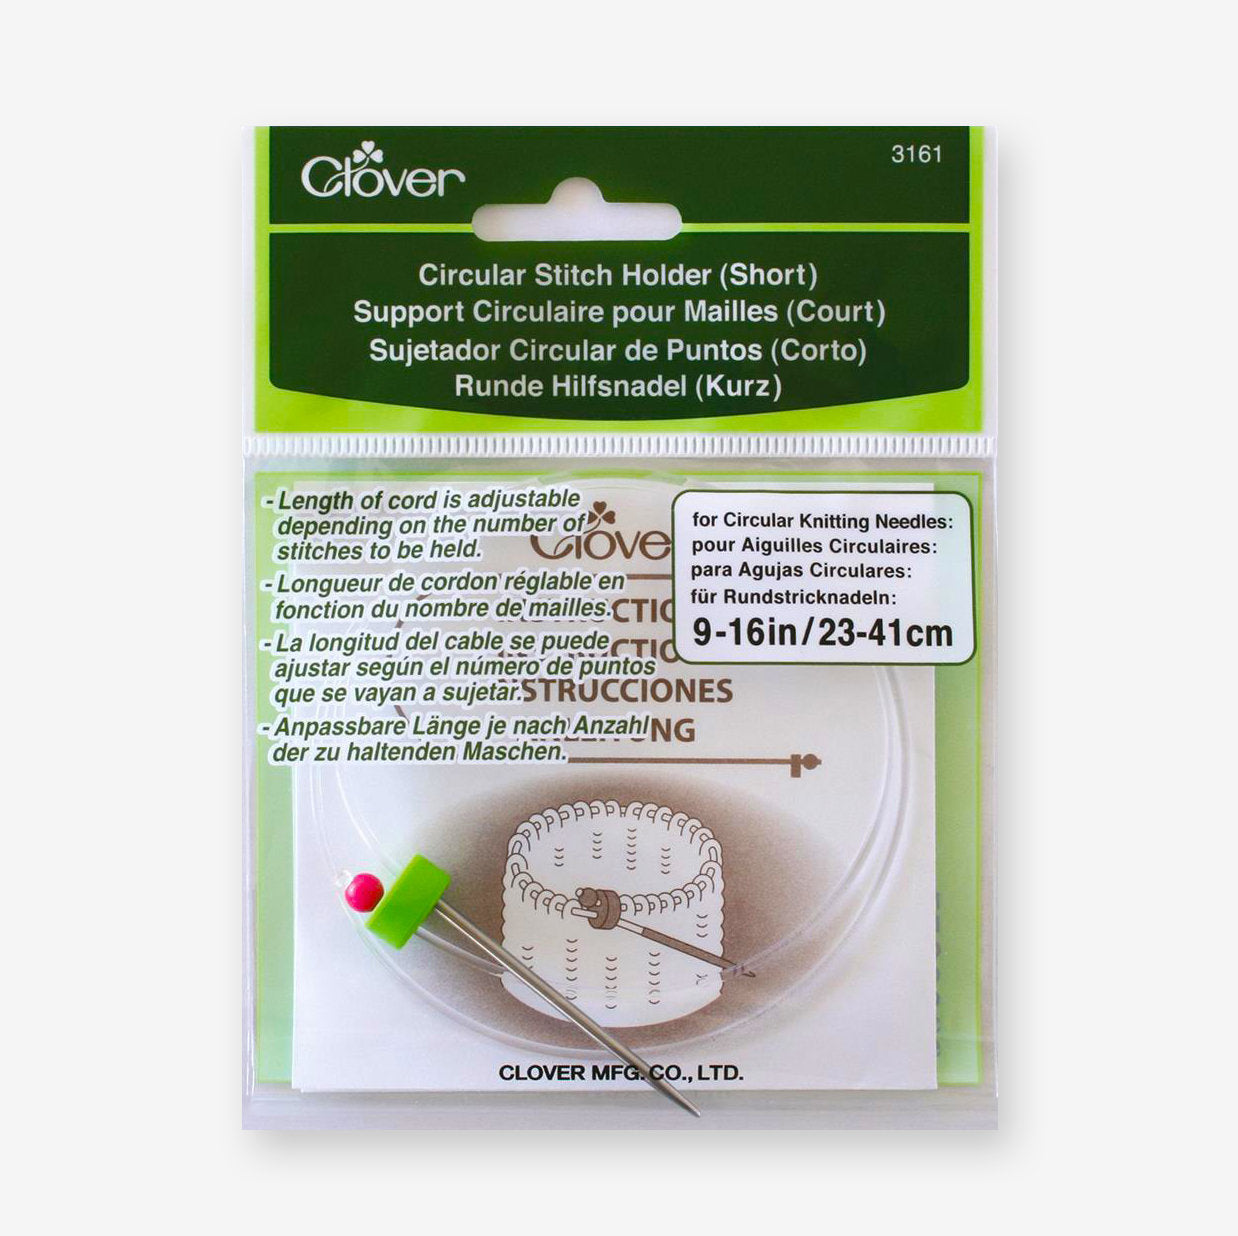 Stitch holder for circular needles Clover 3161 - Flexible and adjustable cable to store your knitting stitches